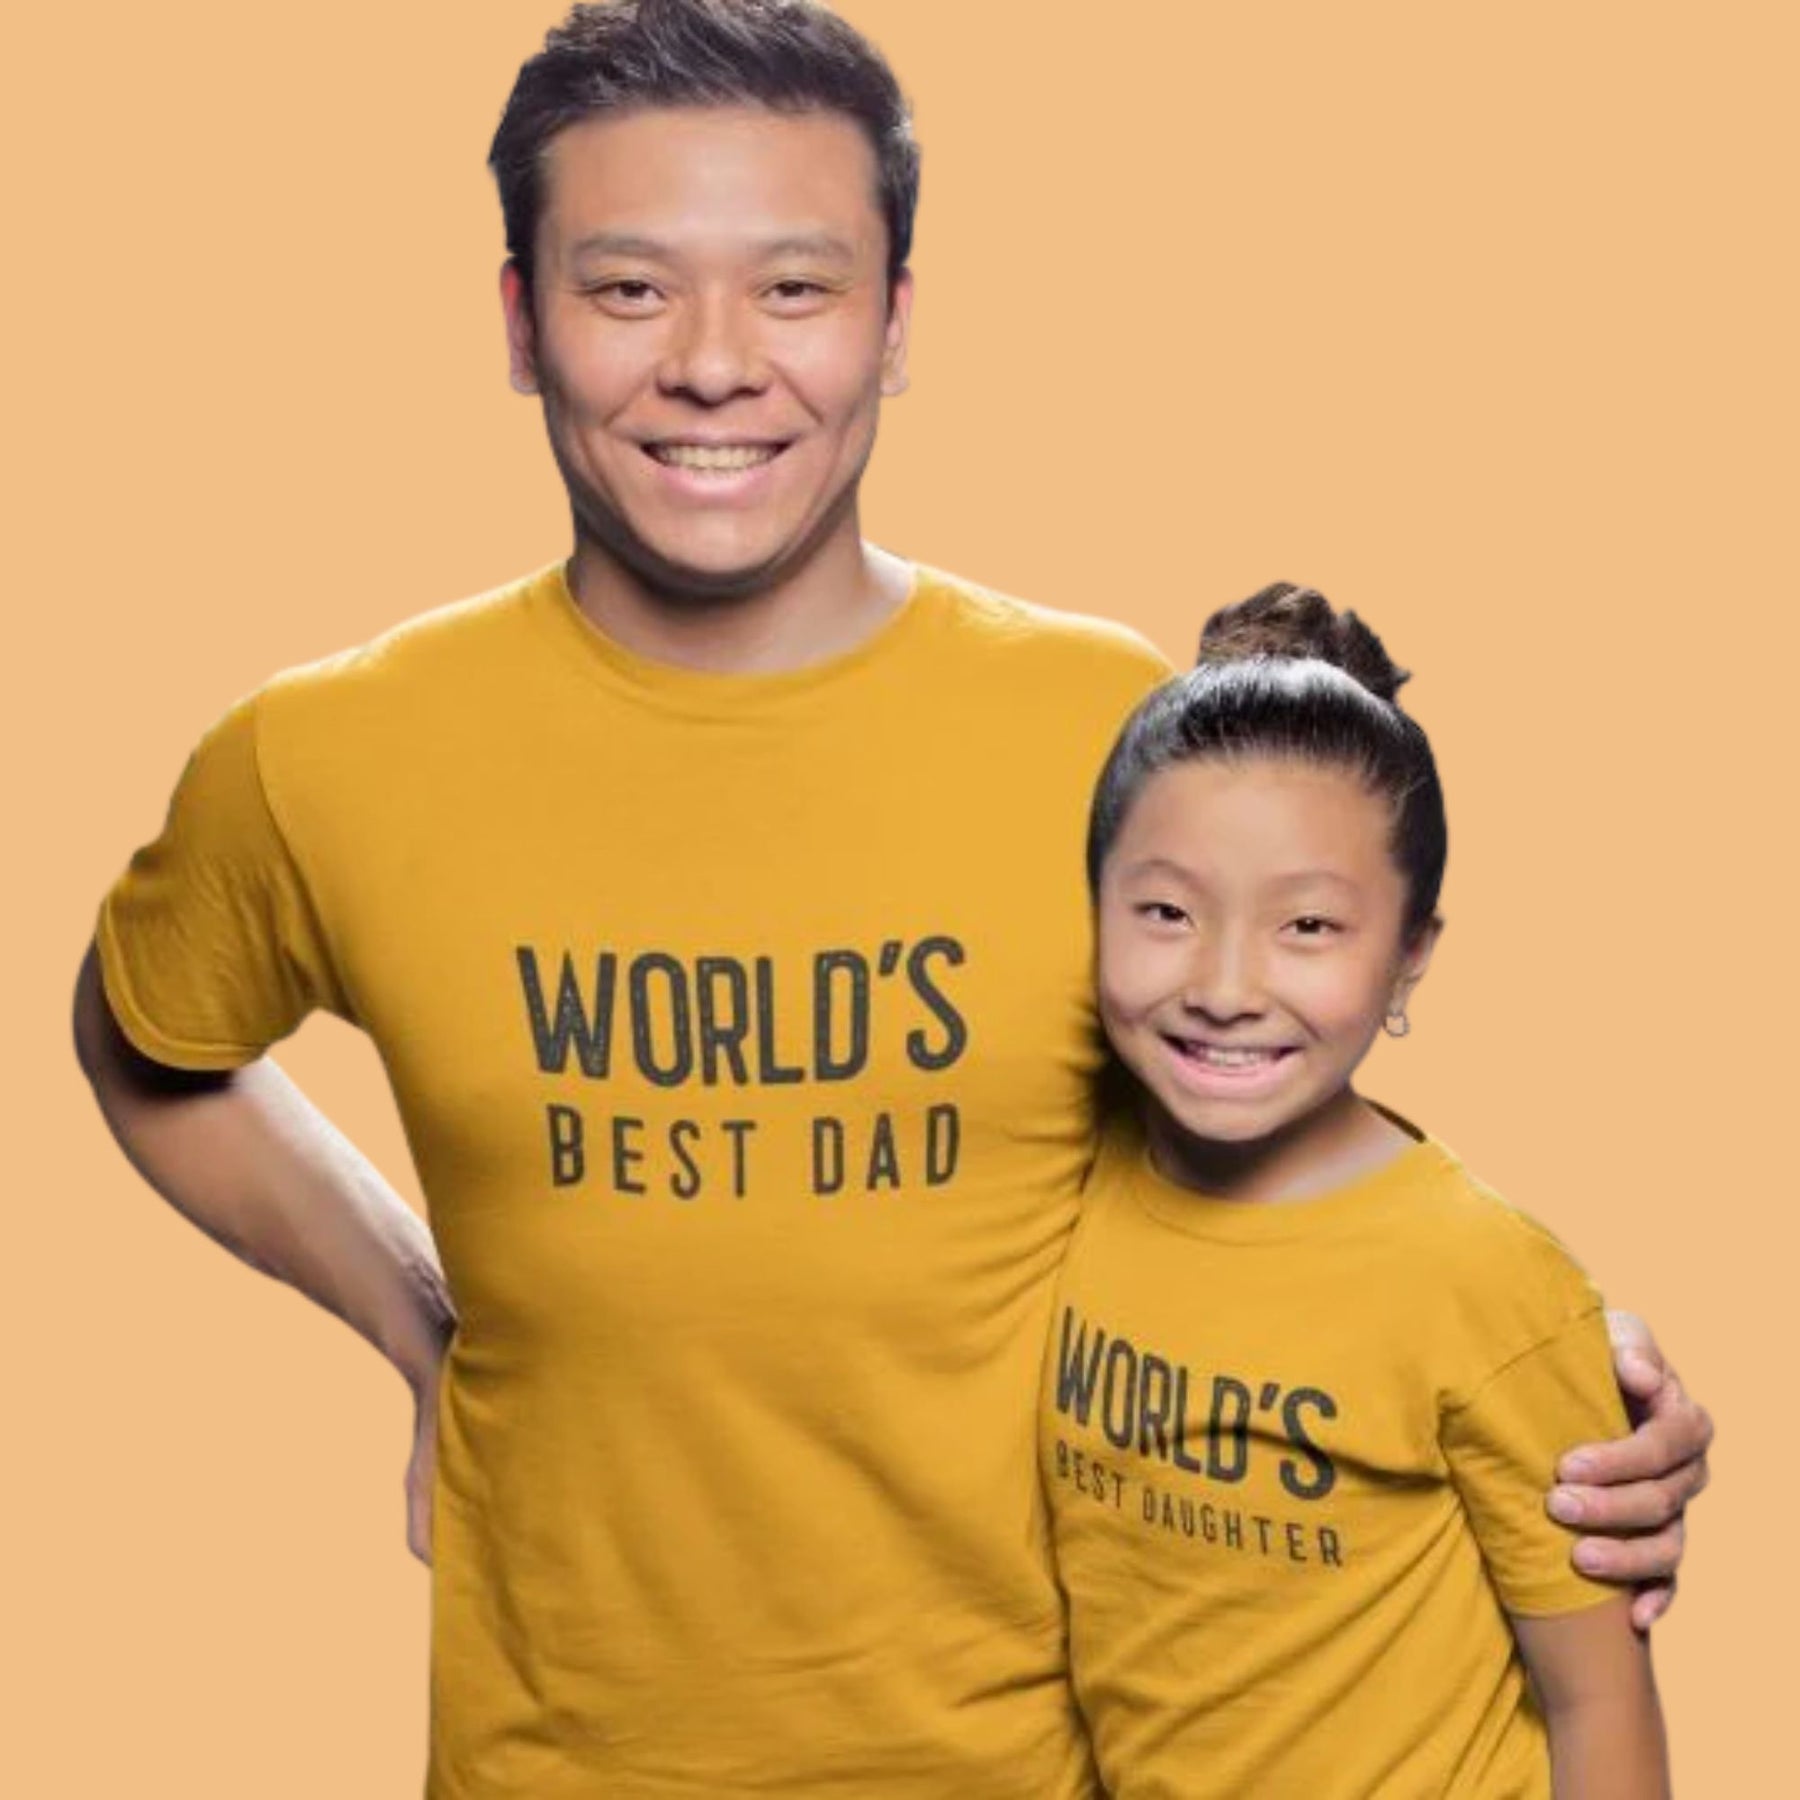 wolds-best-daughter-dad-black-matching-tshirts-golden-yellow